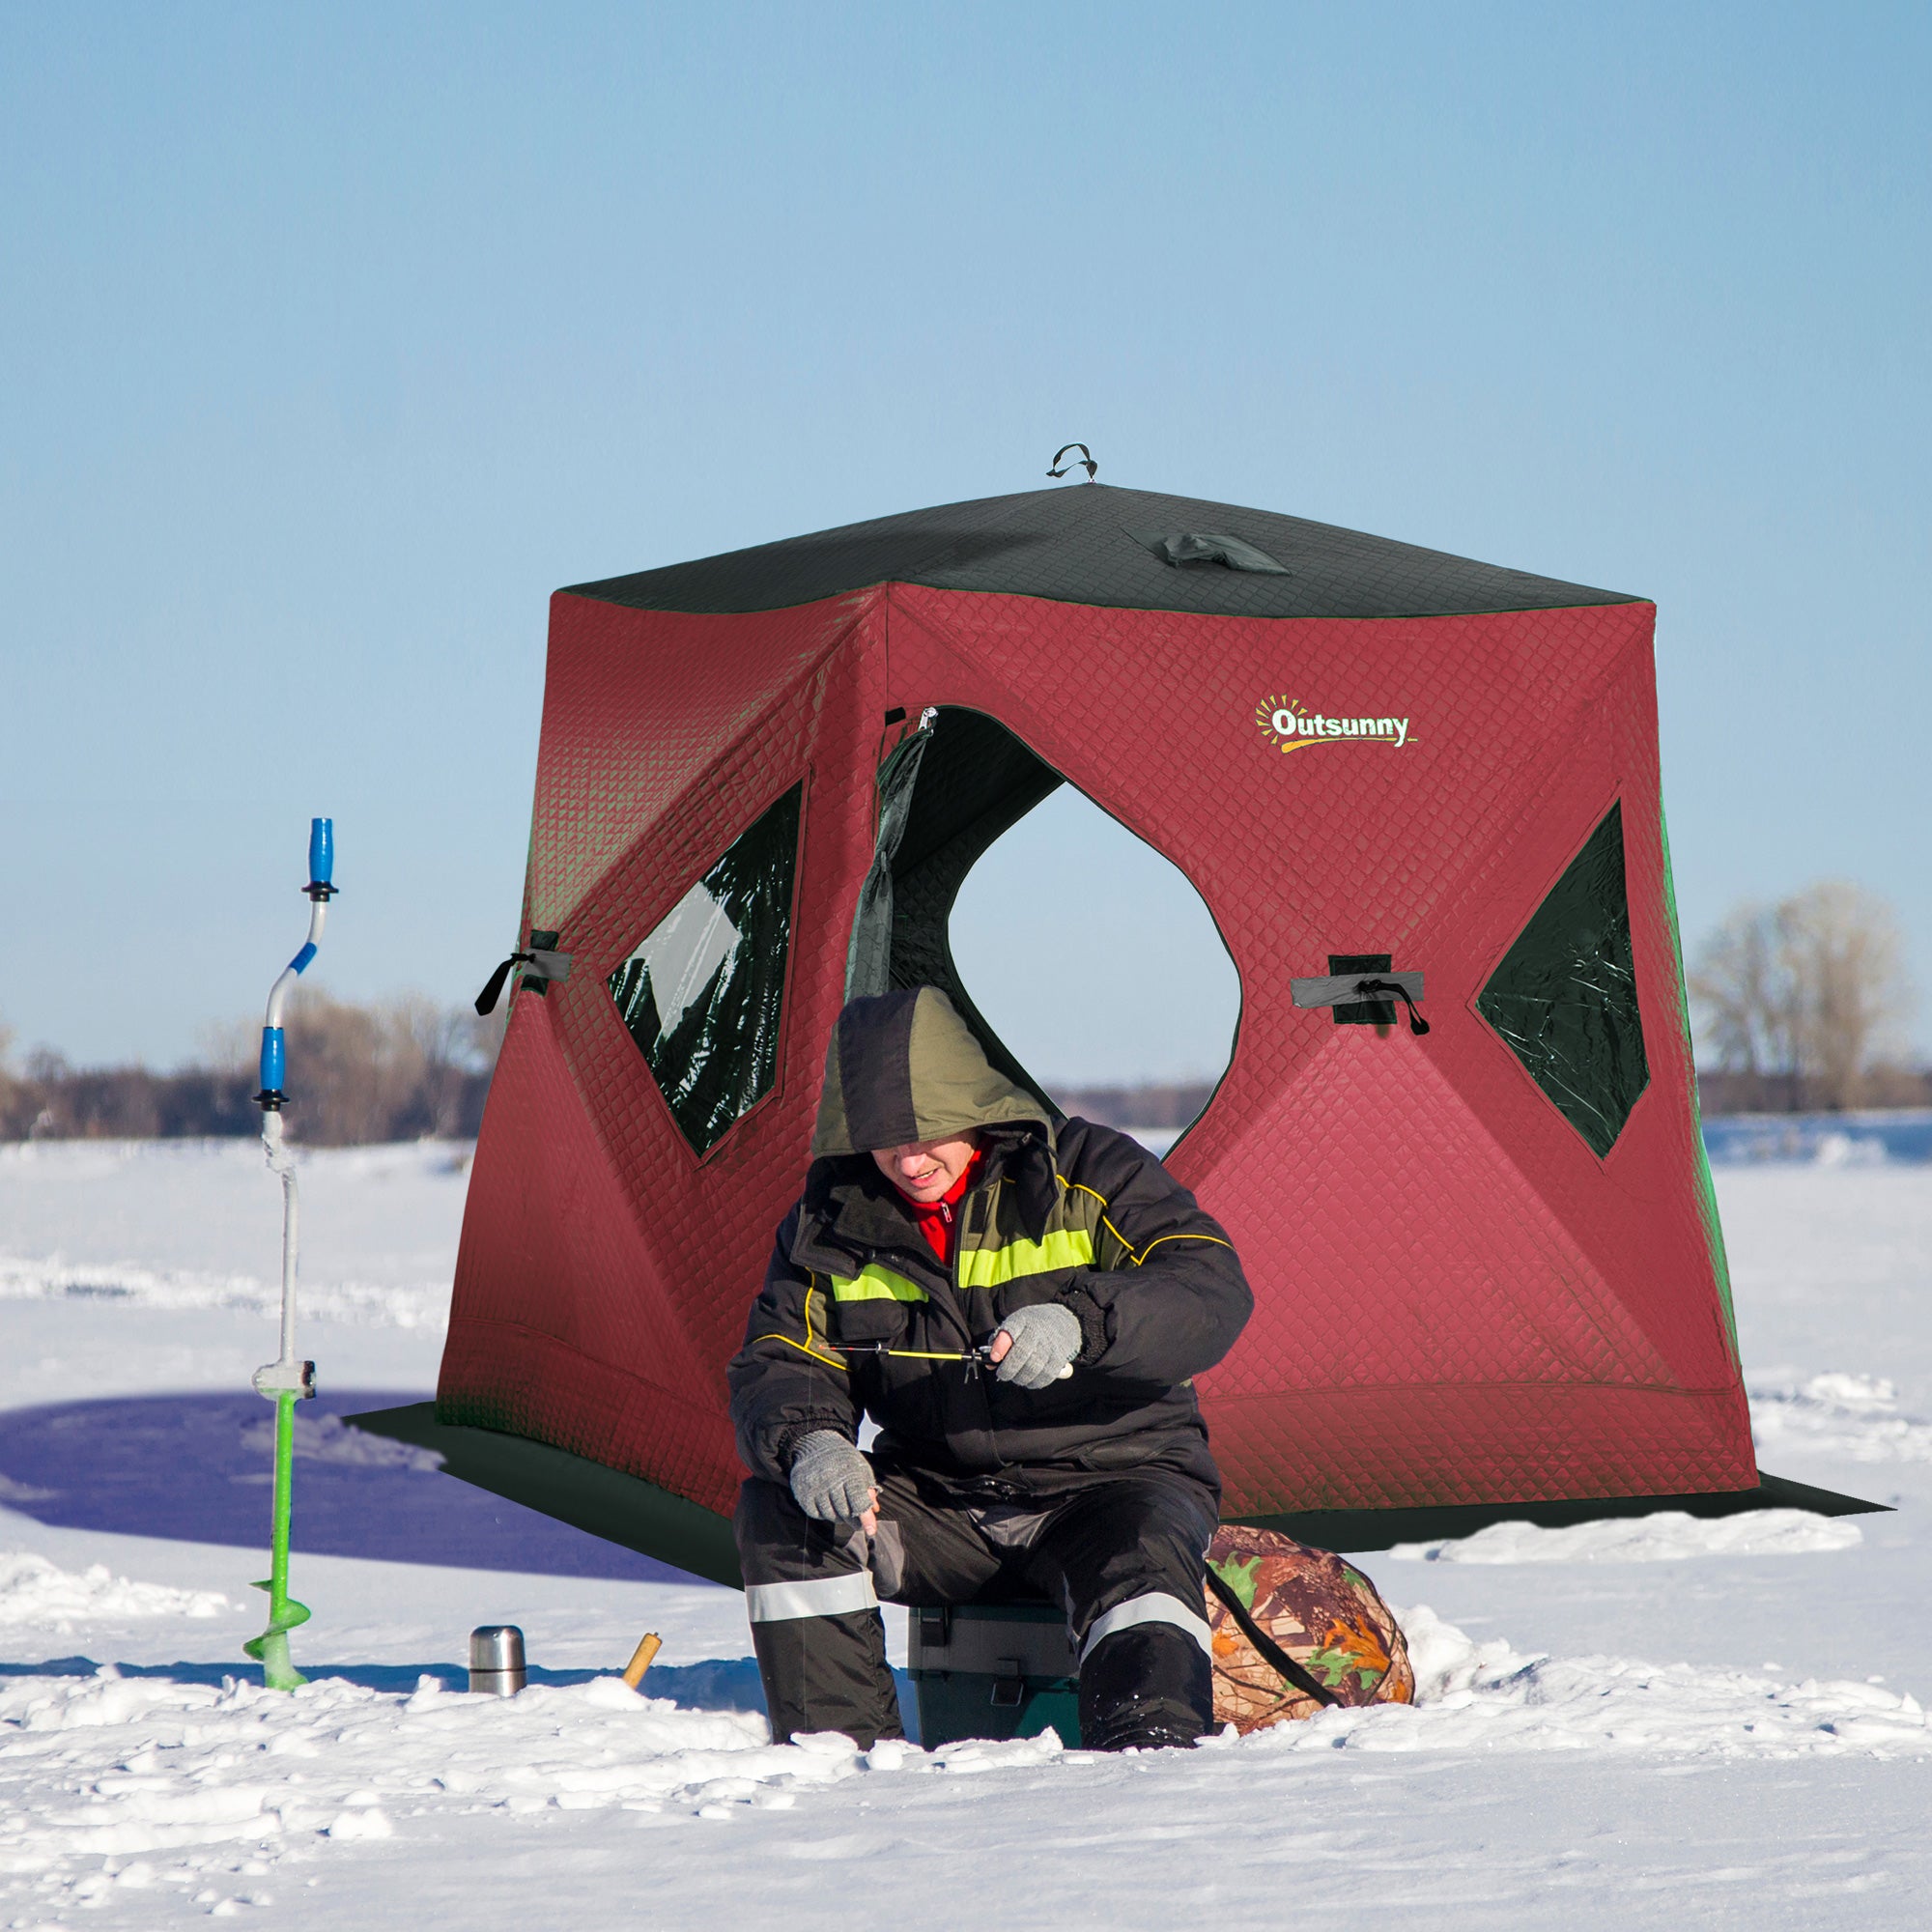 Outsunny 2 Person Ice Fishing Shelter Pop-p Portable Ice Fishing Tent， Red